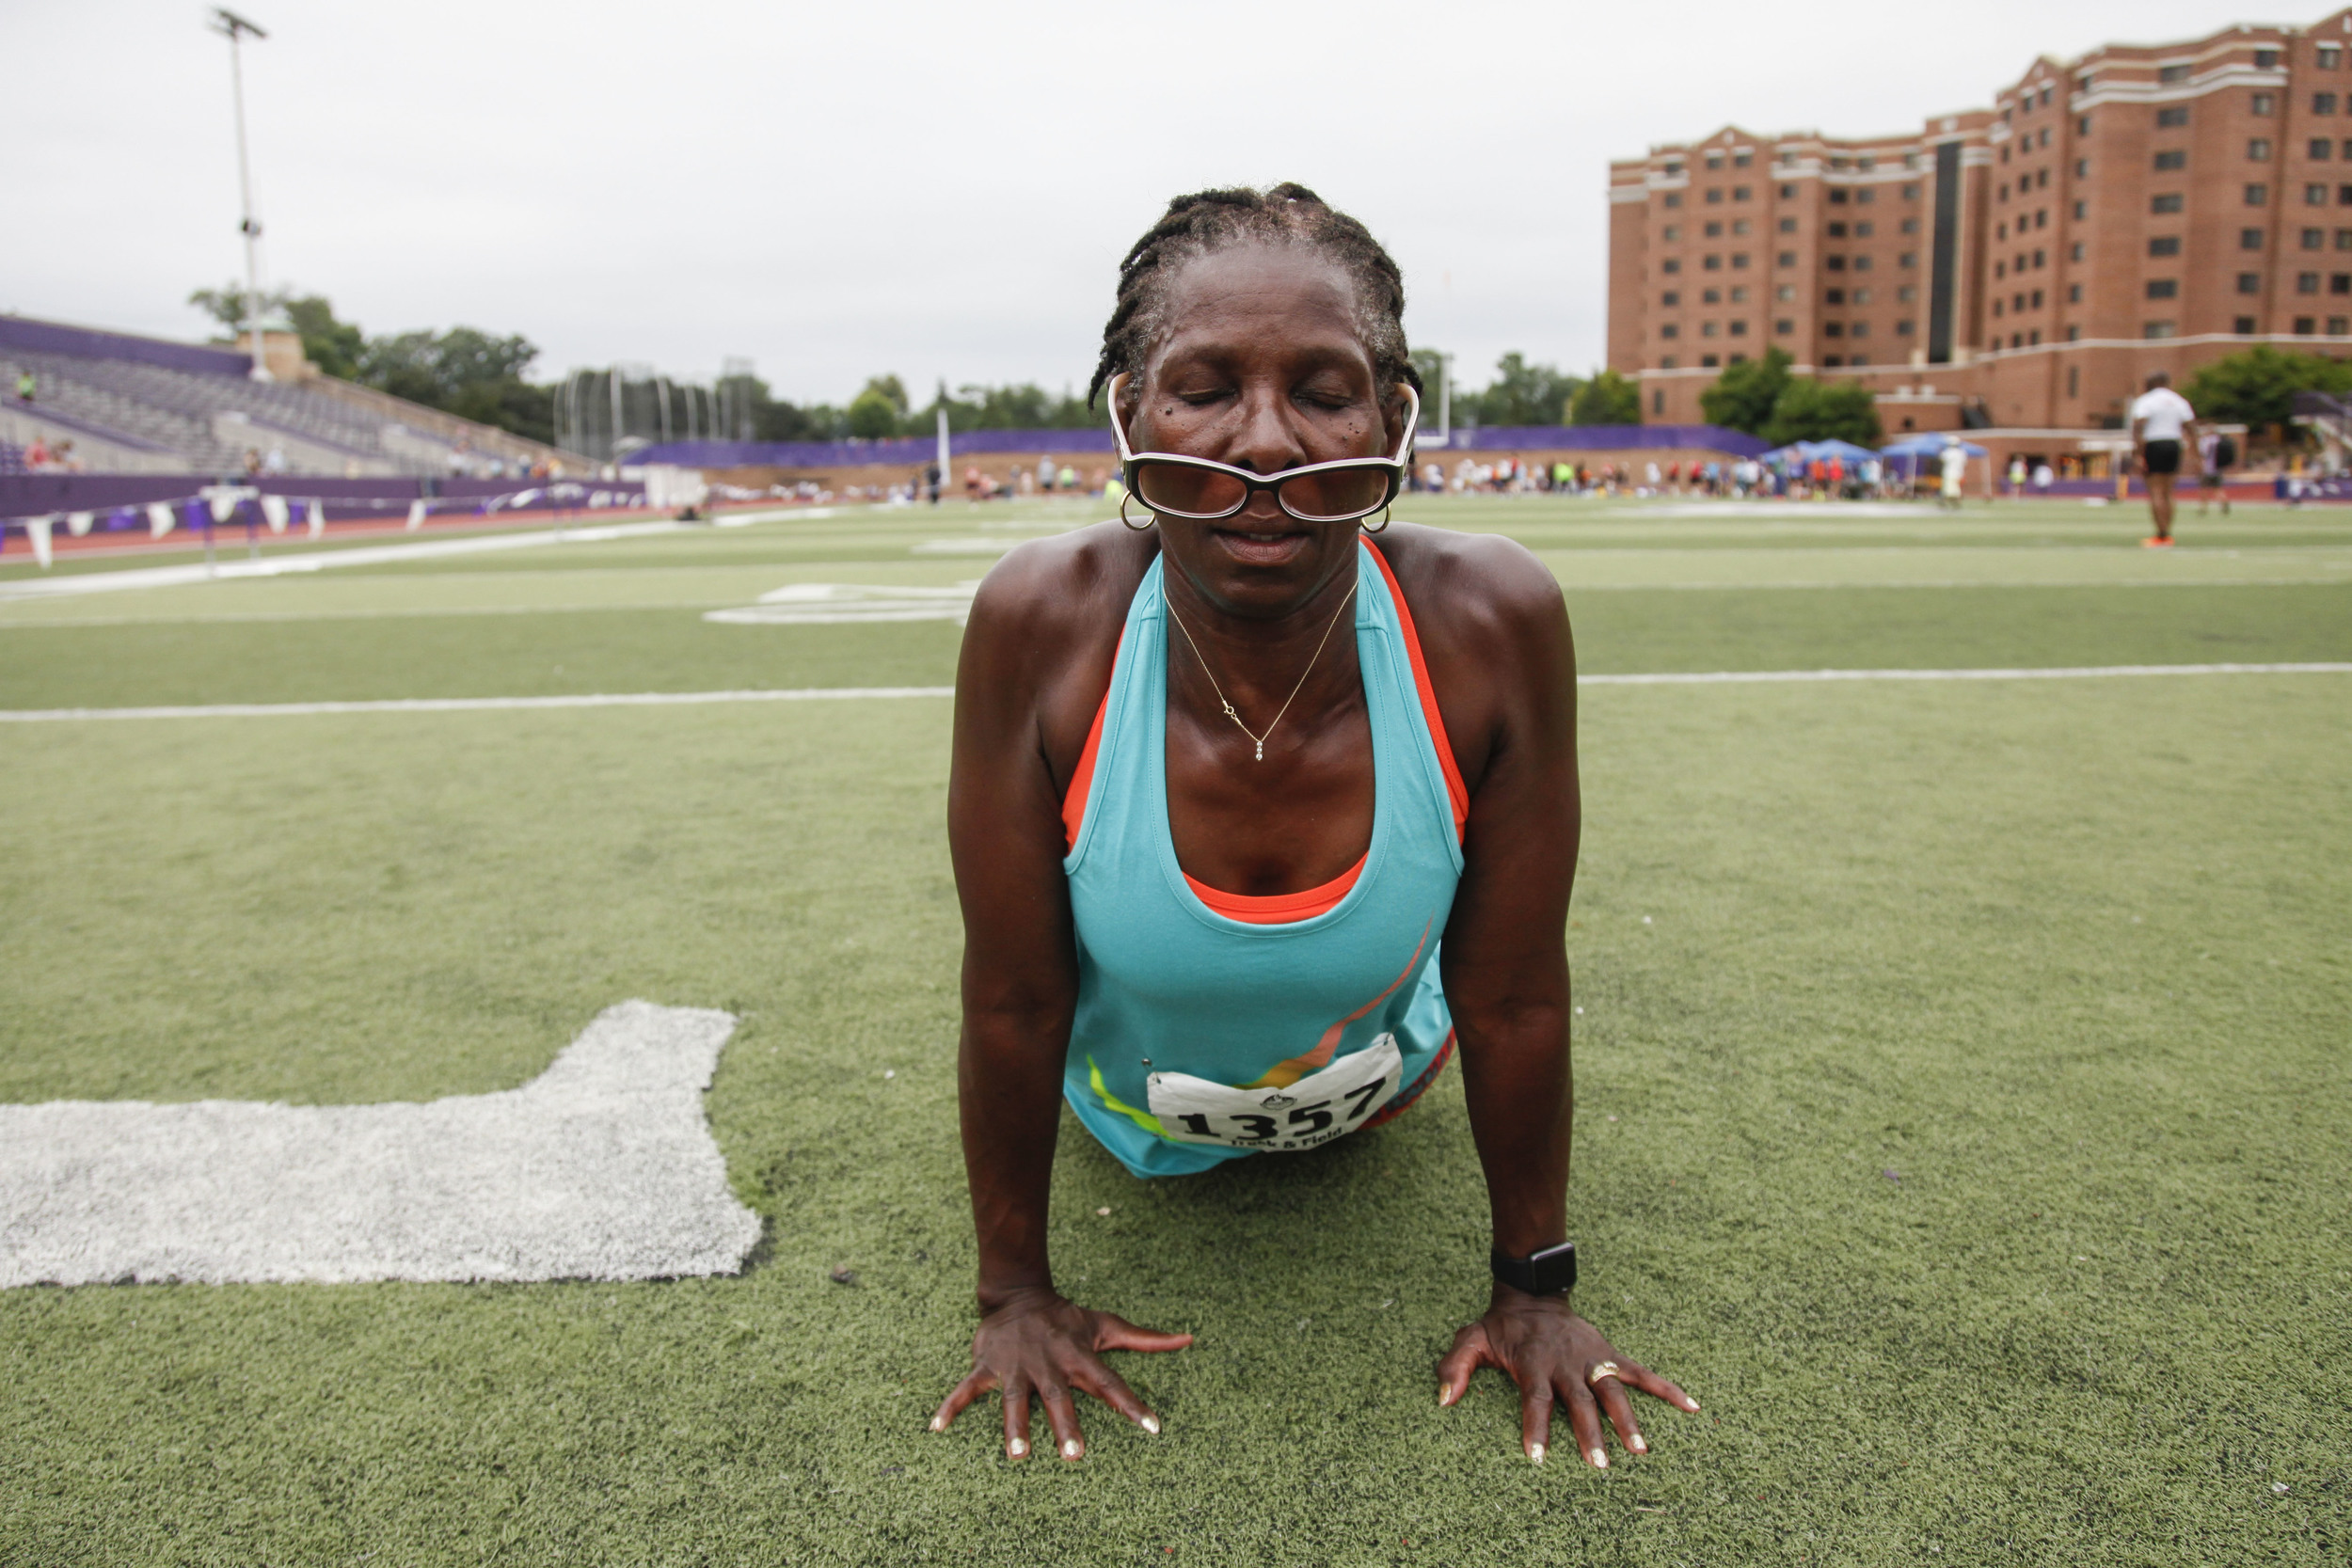  Regina Stewart, a runner participating in the 2015 National Senior Games Track and Field event, stretches in between heats on the St. Thomas University Field in Minneapolis, MN. This event took place on Jul. 14, 2015. 